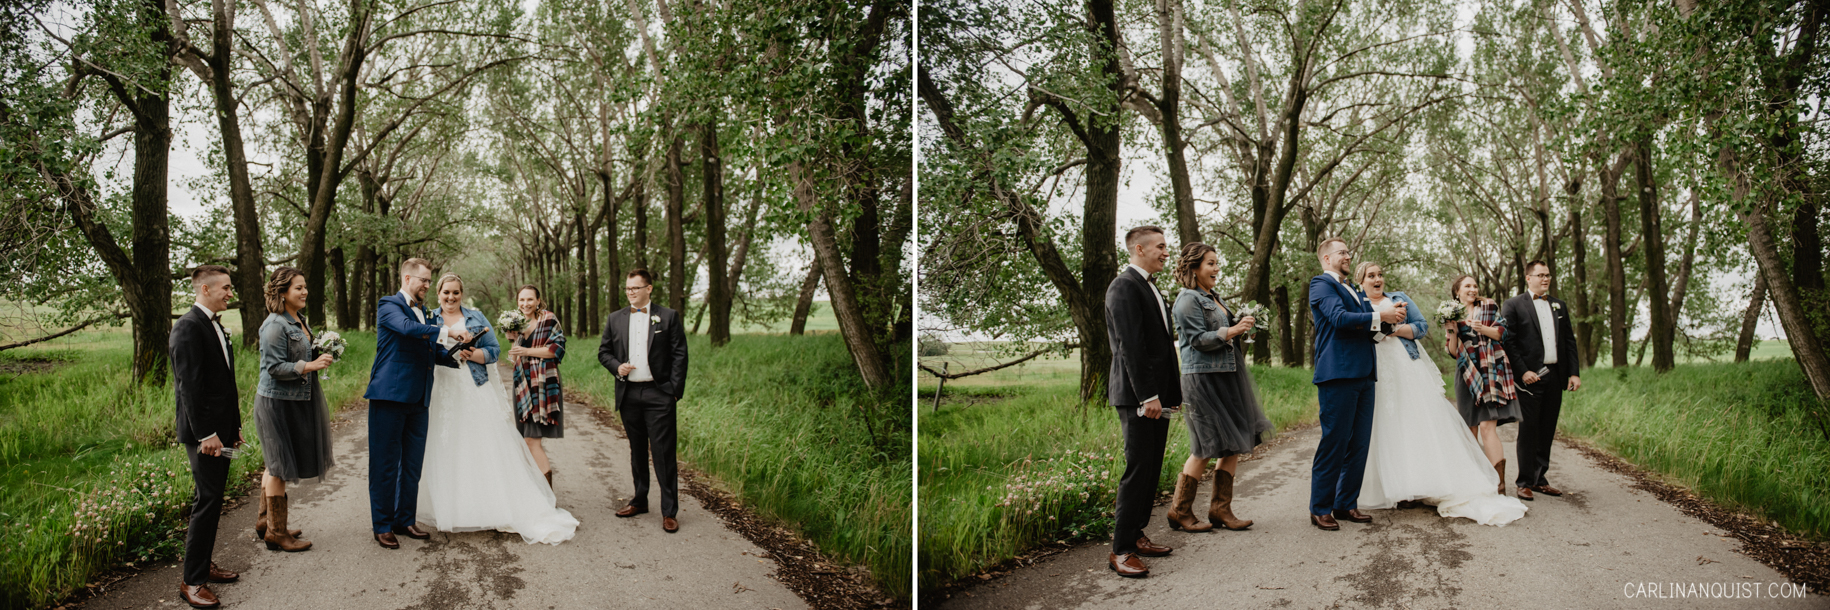 Champagne Toast | Airdrie Wedding Photographer